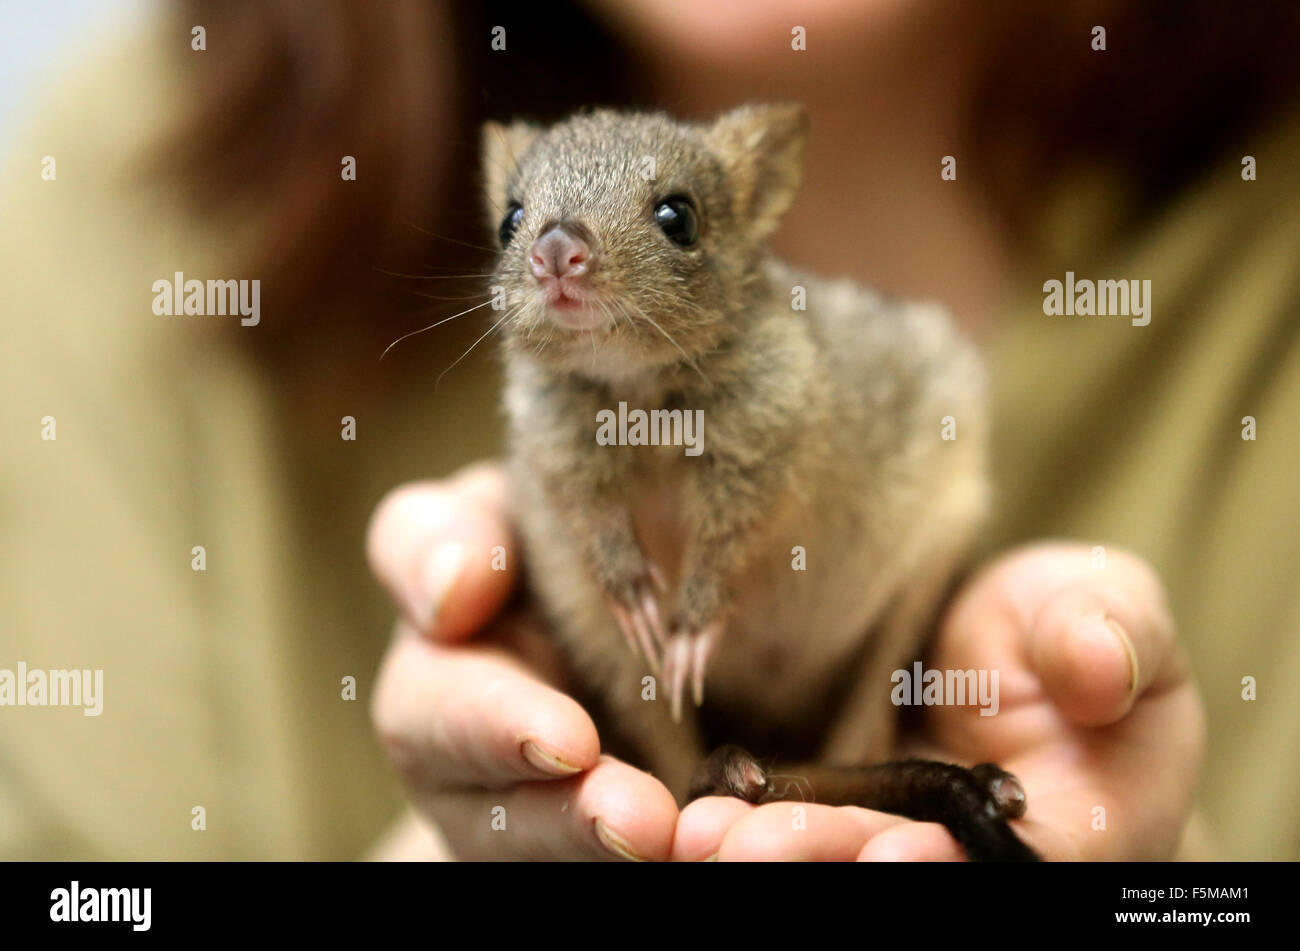 Duisburg, Germany. 6th Nov, 2015. Four-month old Lucy the baby rat-kangaroo in the hands of her keeper Anna-Lena, at the zoo in Duisburg, Germany, 6 November 2015. Lucy is being raised by keepers because her mother is died. PHOTO: ROLAND WEIHRAUCH/DPA/Alamy Live News Stock Photo